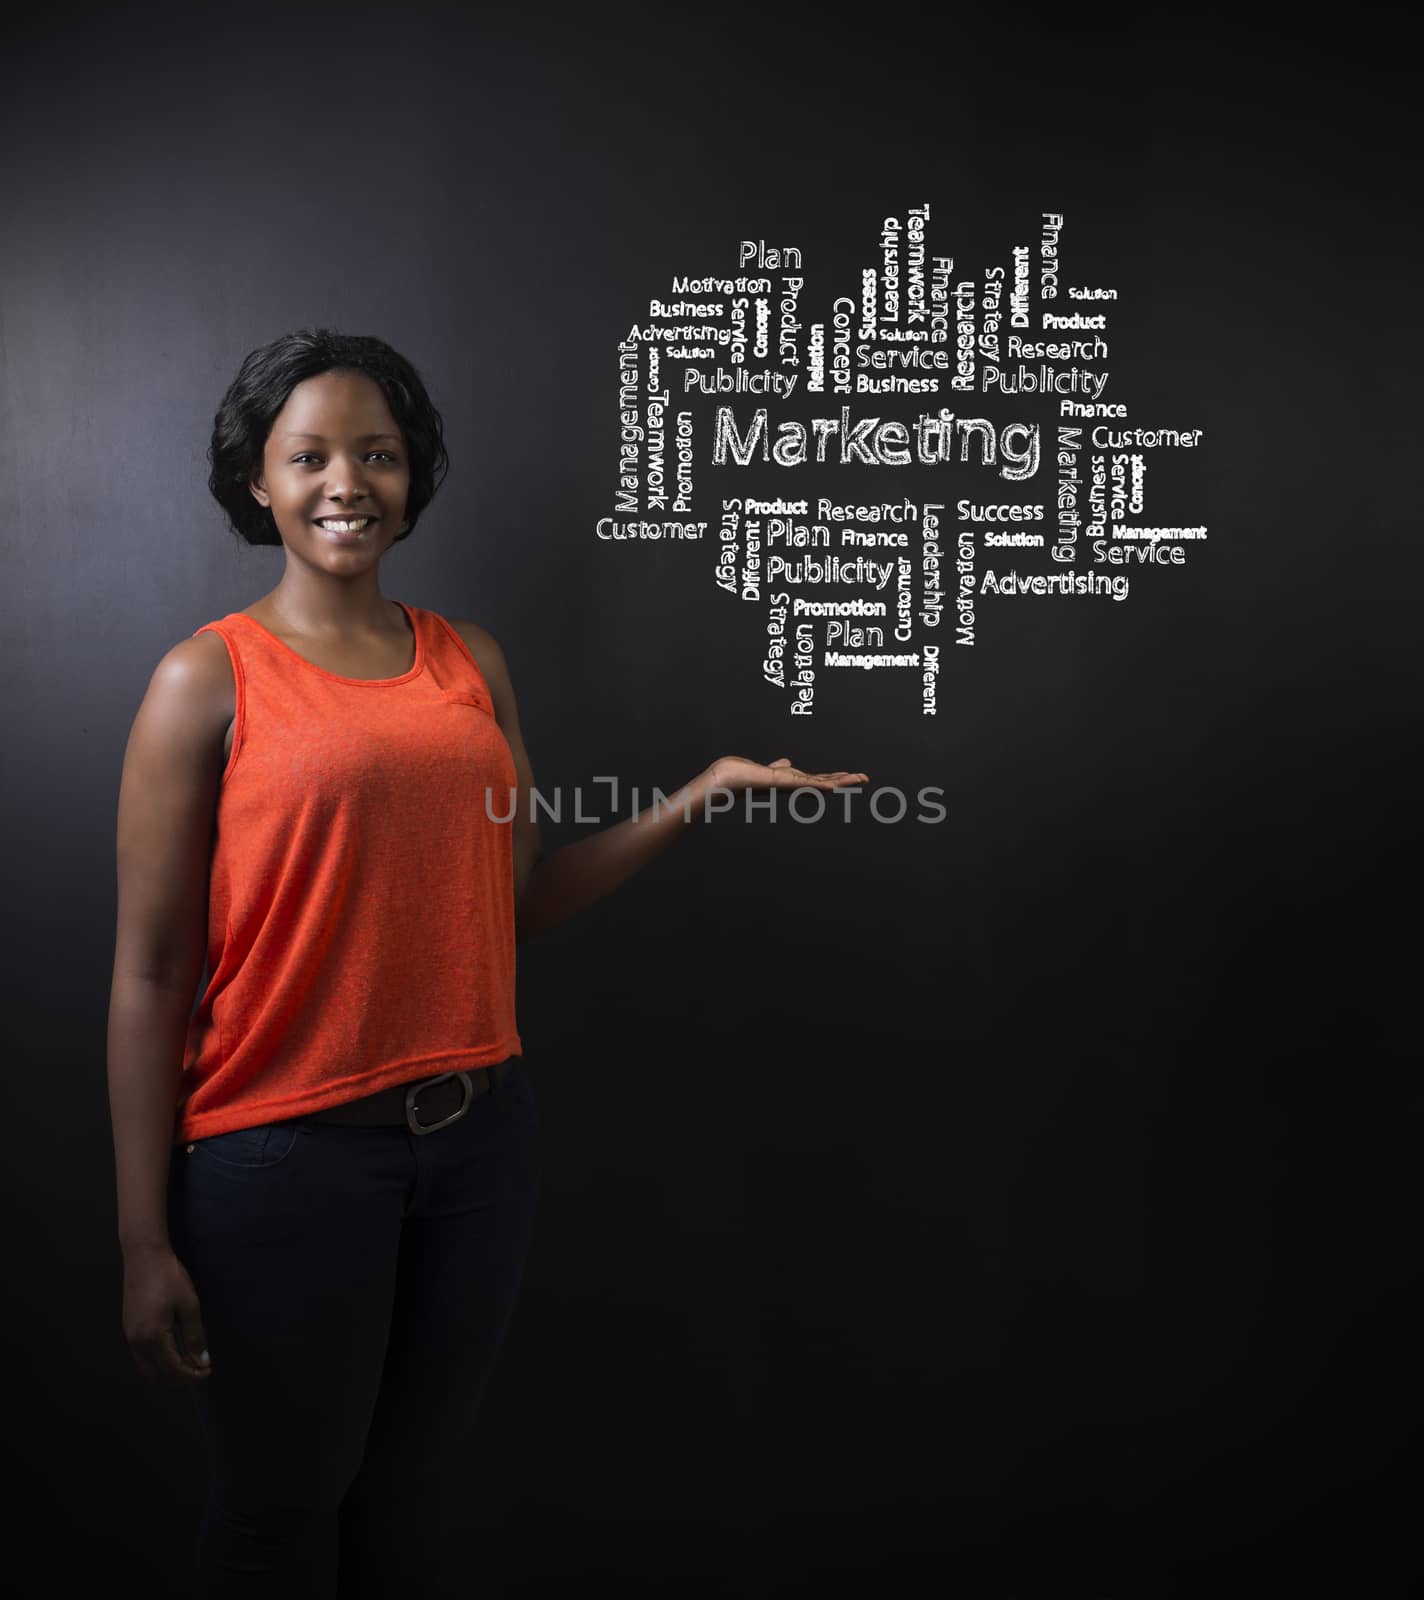 South African or African American woman teacher or student standing with her hand out against a blackboard background with a chalk marketing diagram